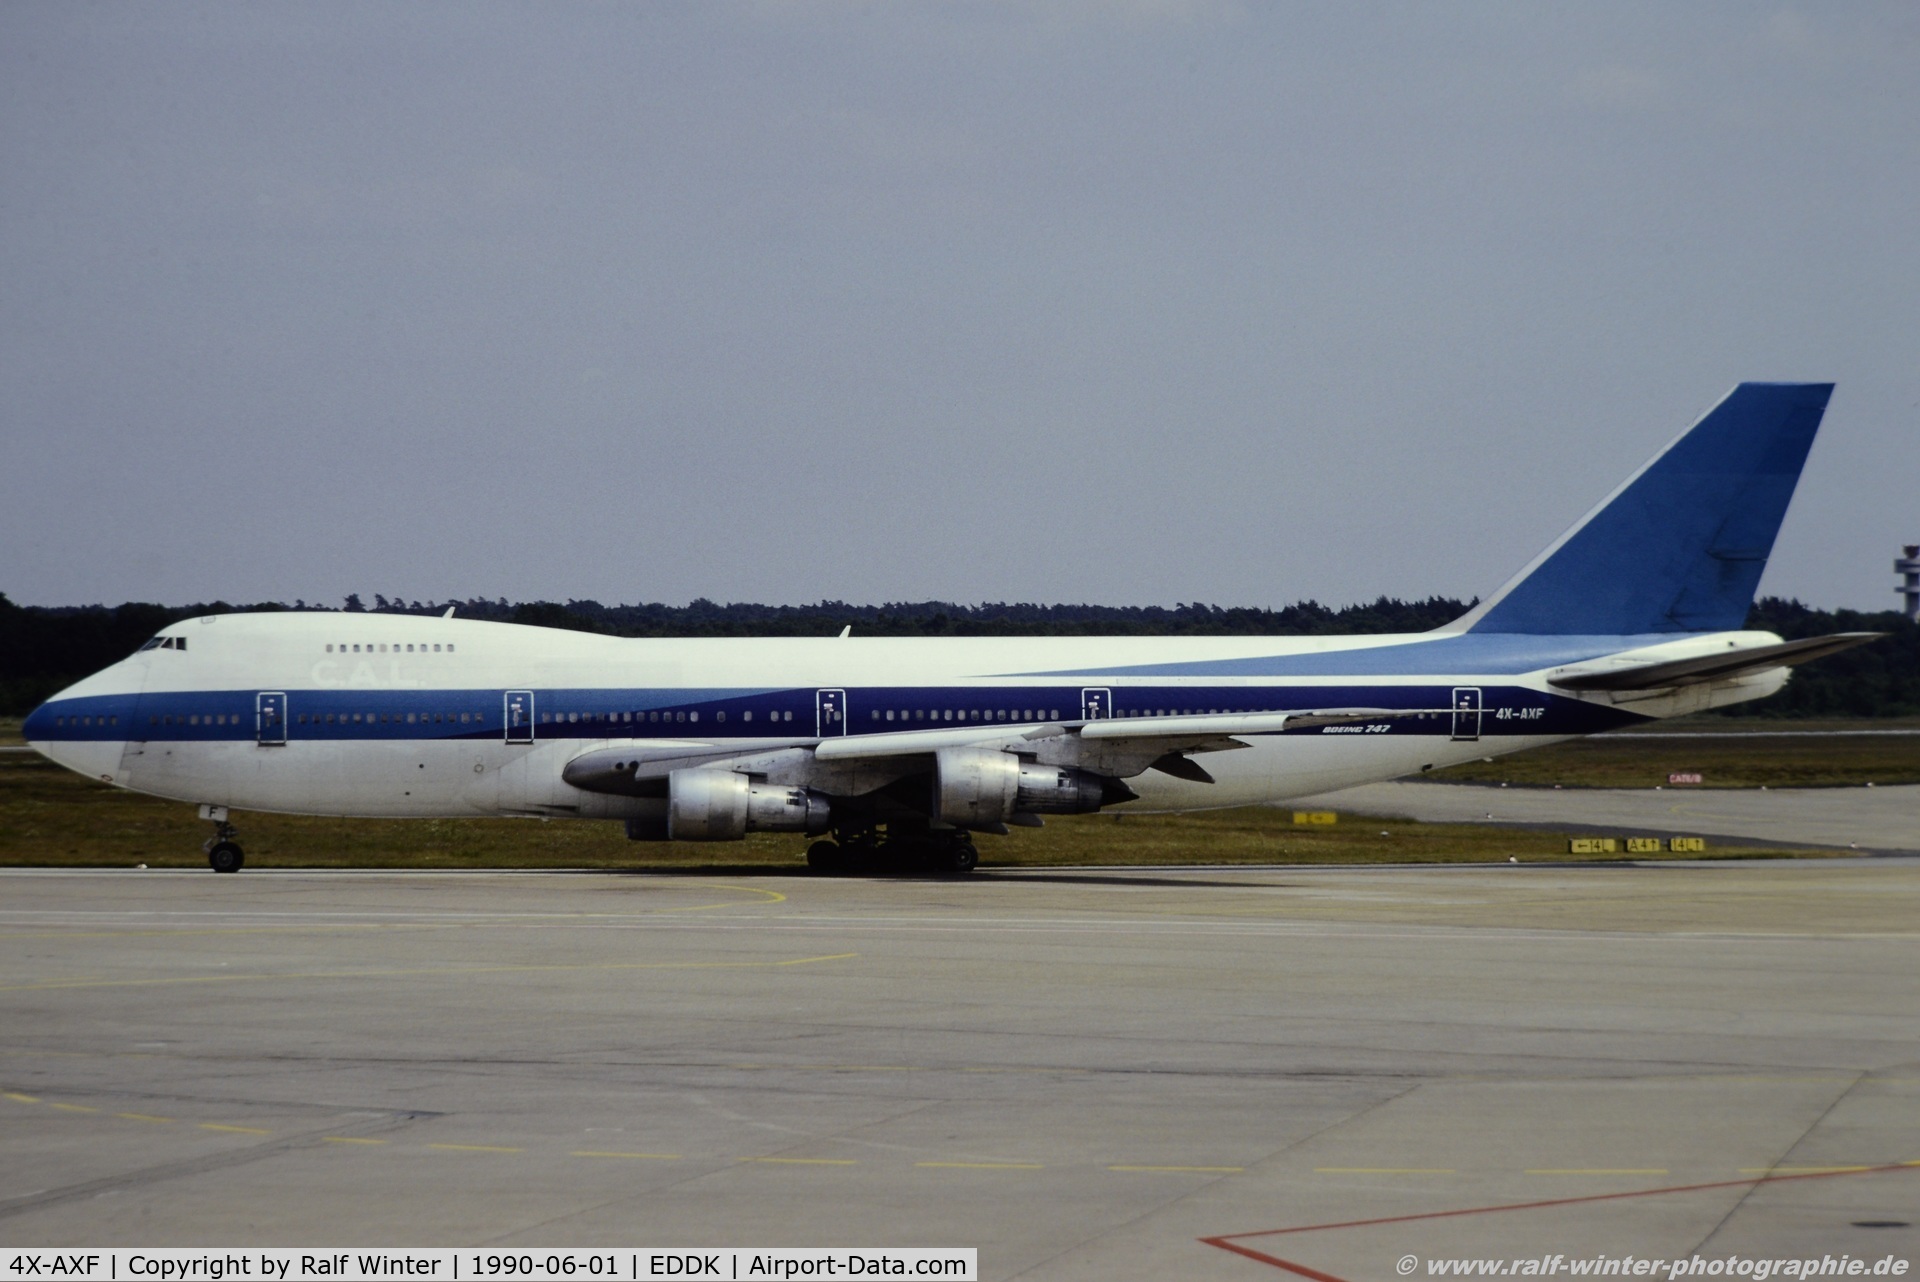 4X-AXF, 1978 Boeing 747-258C C/N 21594, Boeing 747-258C - 5C ICL CAL Cargo Airlines ist ELAL - 21594 - 4X-AXF - 01.06.1990 - CGN